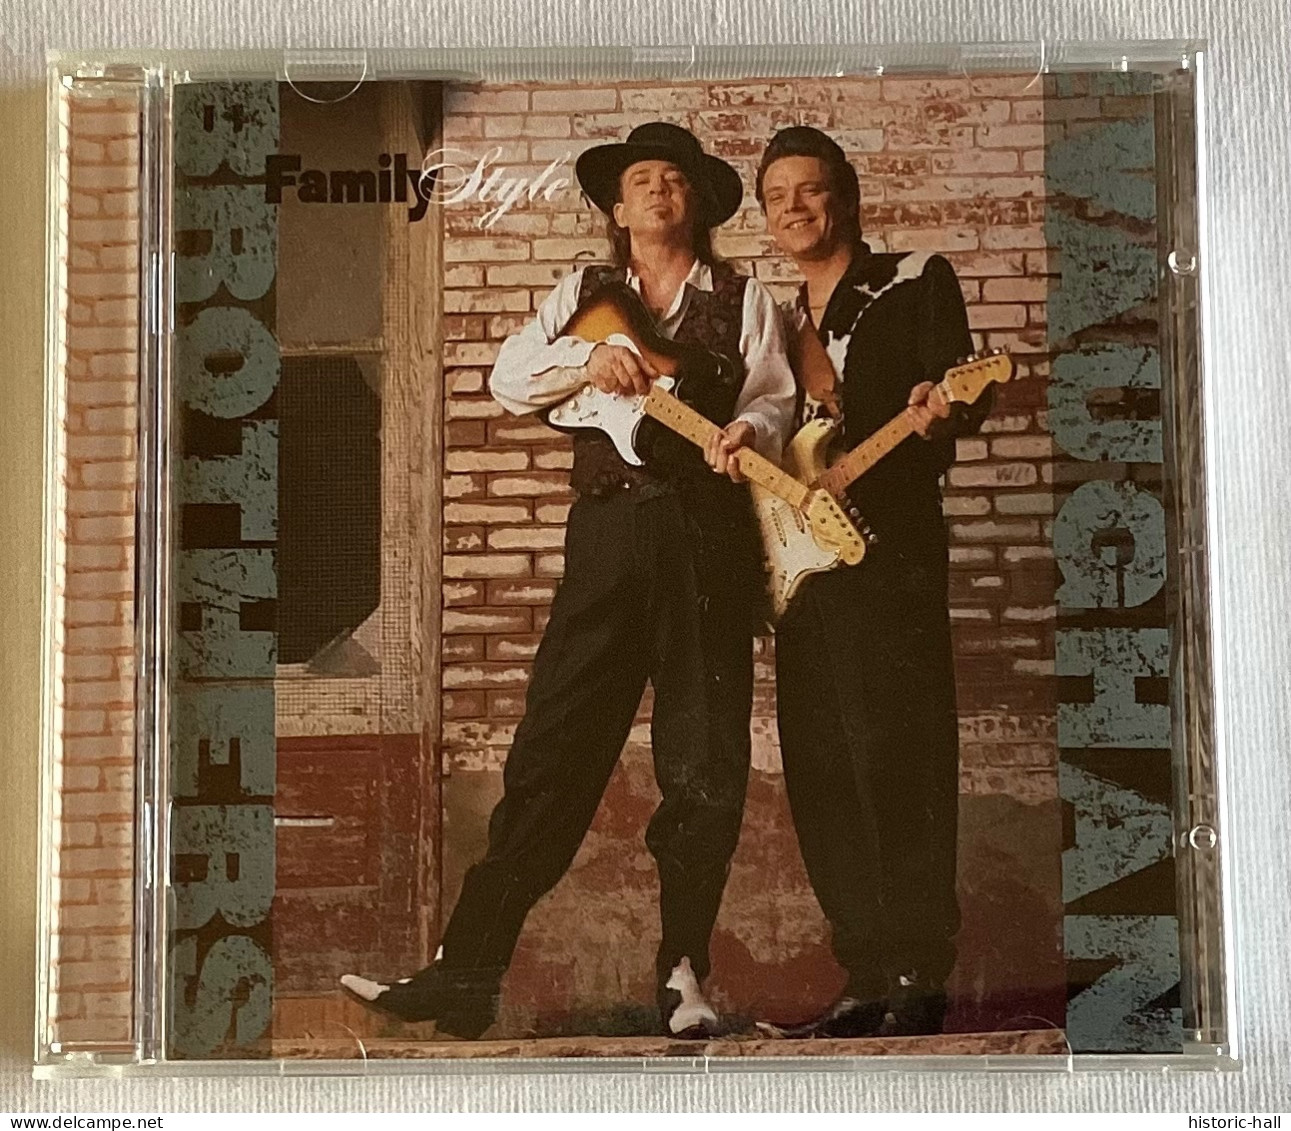 THE VAUGHAN BROTHERS - Family Style - CD - 1990 - Blues